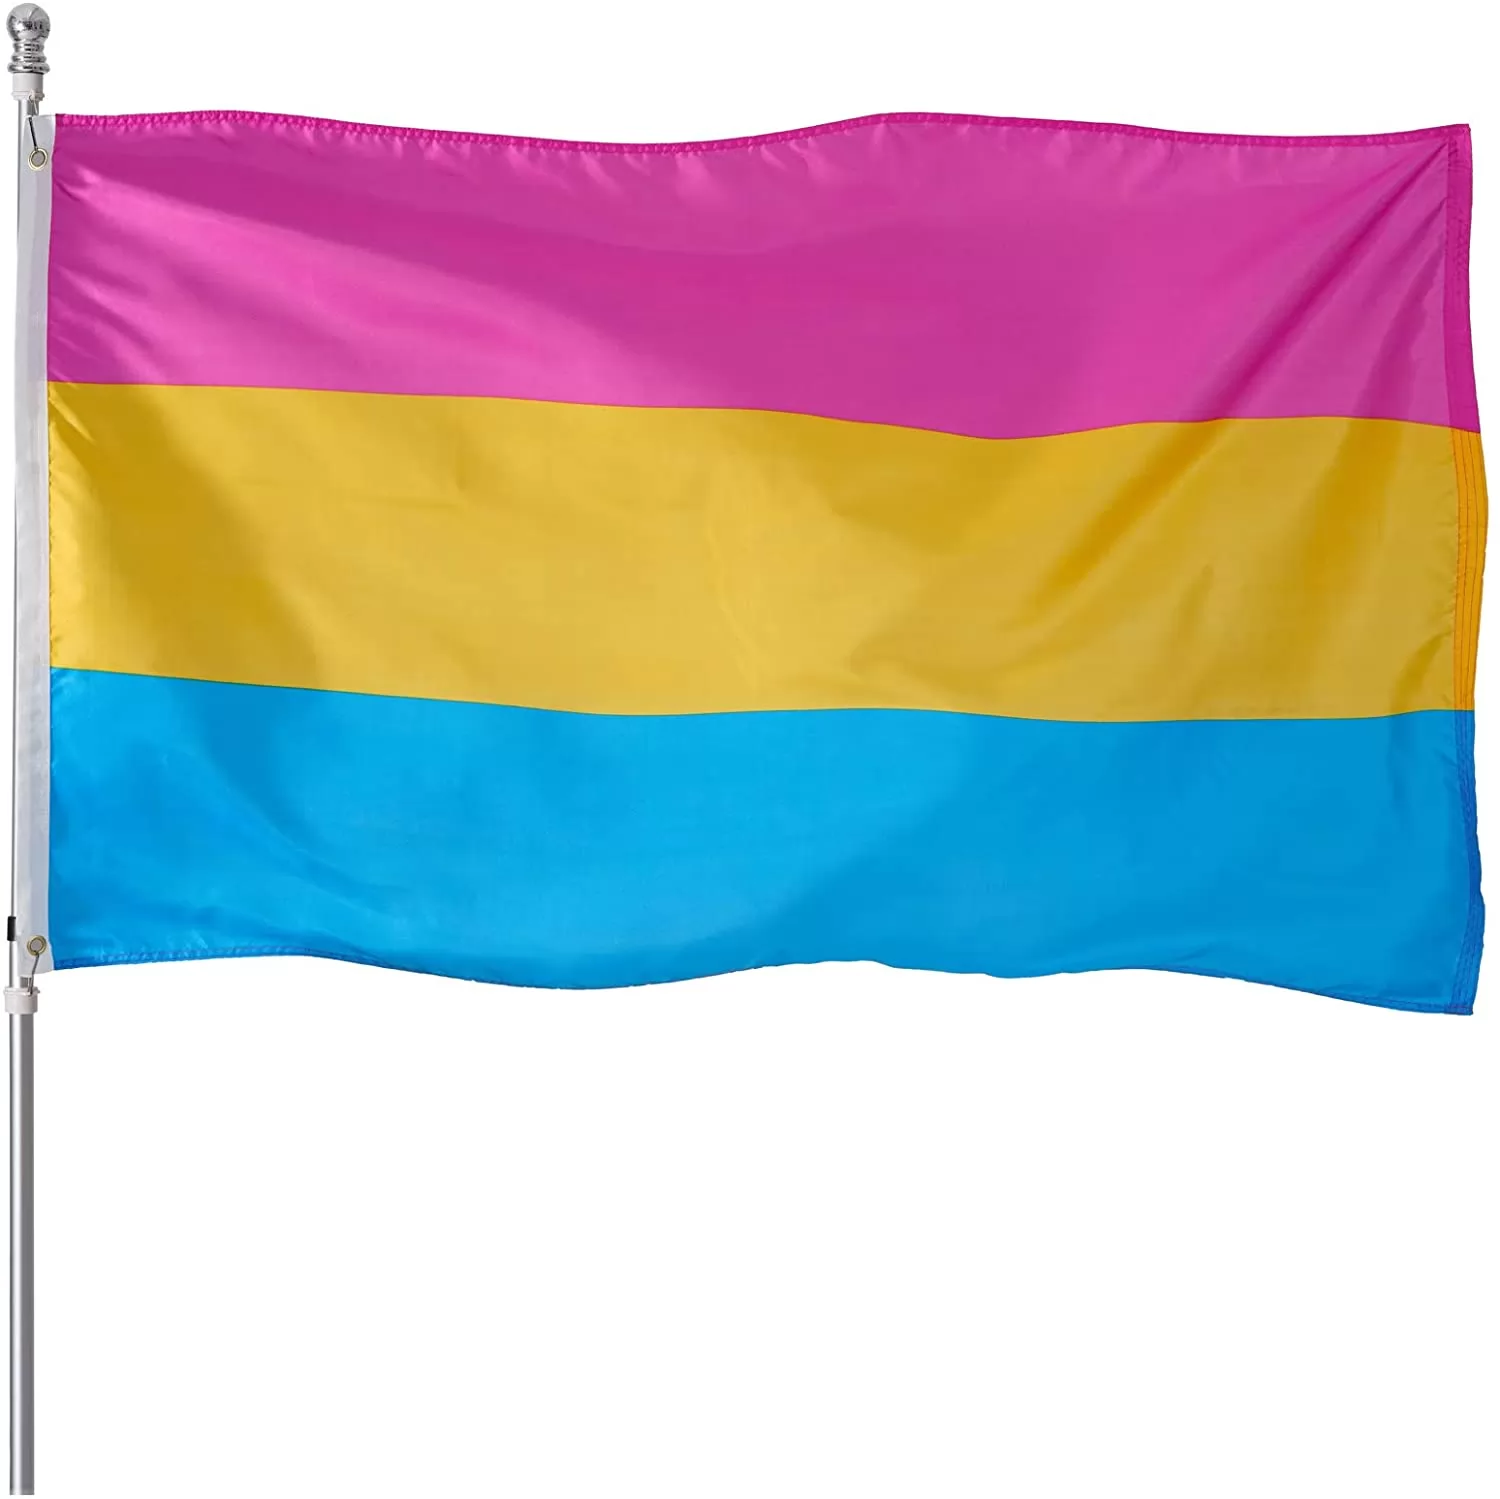 Homissor Pansexual Pan Gay Pride Flag 3x5 Heavy Duty Polyester LGBT Omnisexual Rainbow Equality Flags for Outdoor Wall with Brass Grommets & Durable H